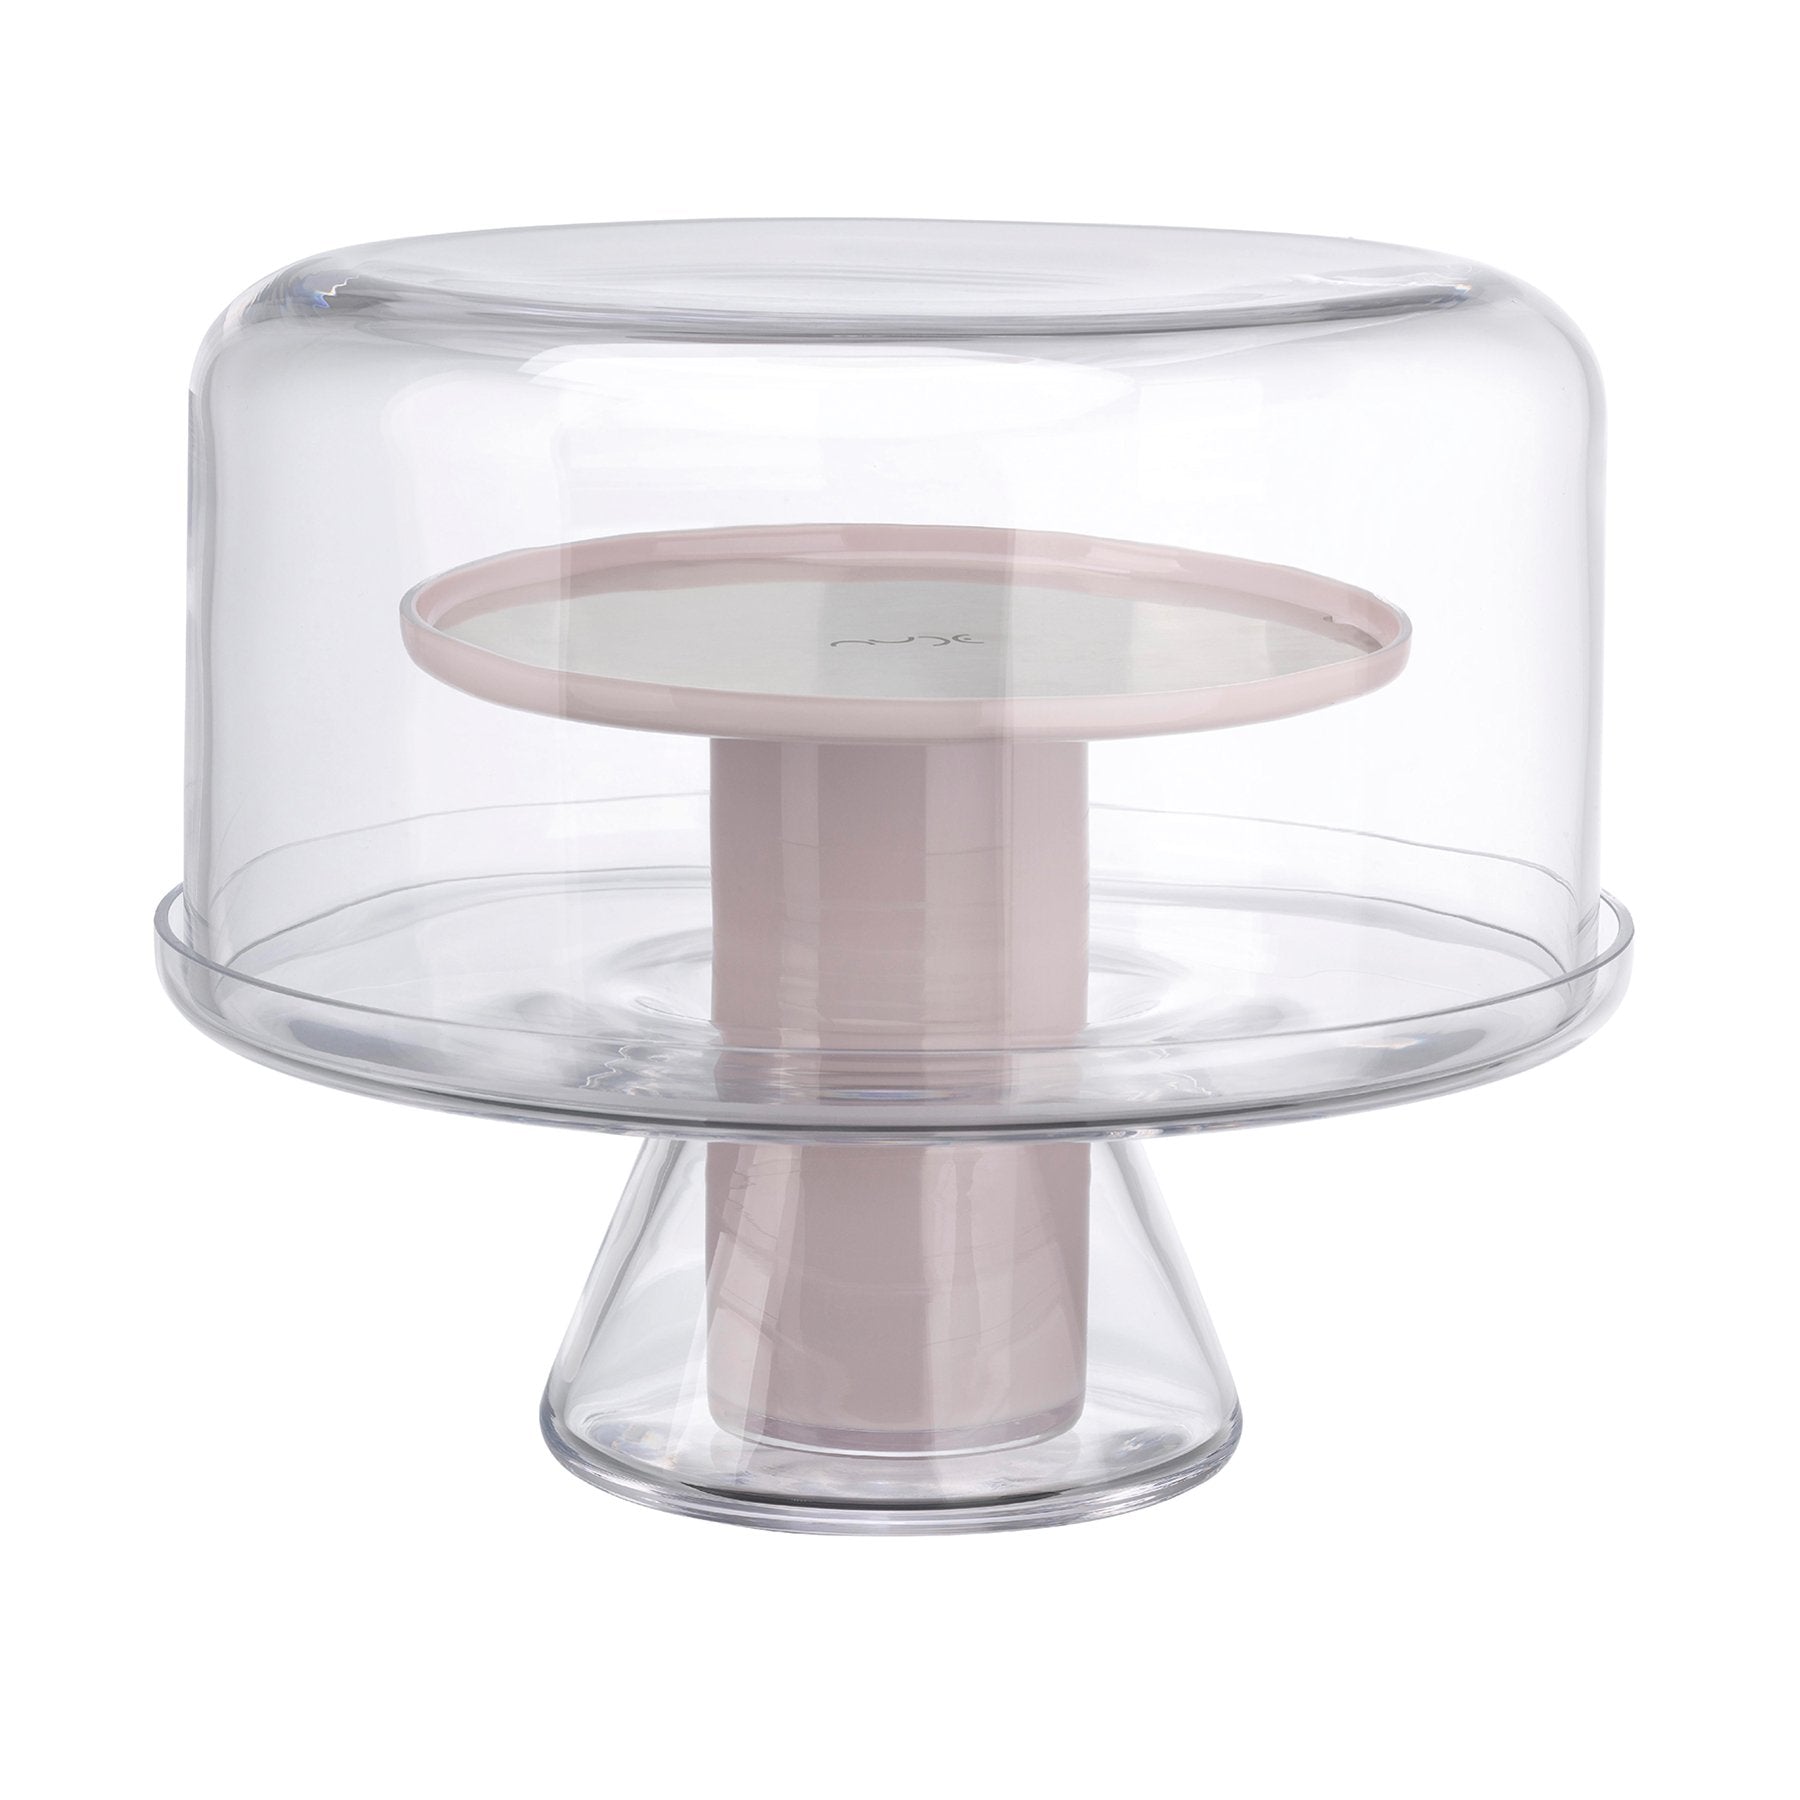 bloom cake stand with dome by nude at adorn.house 